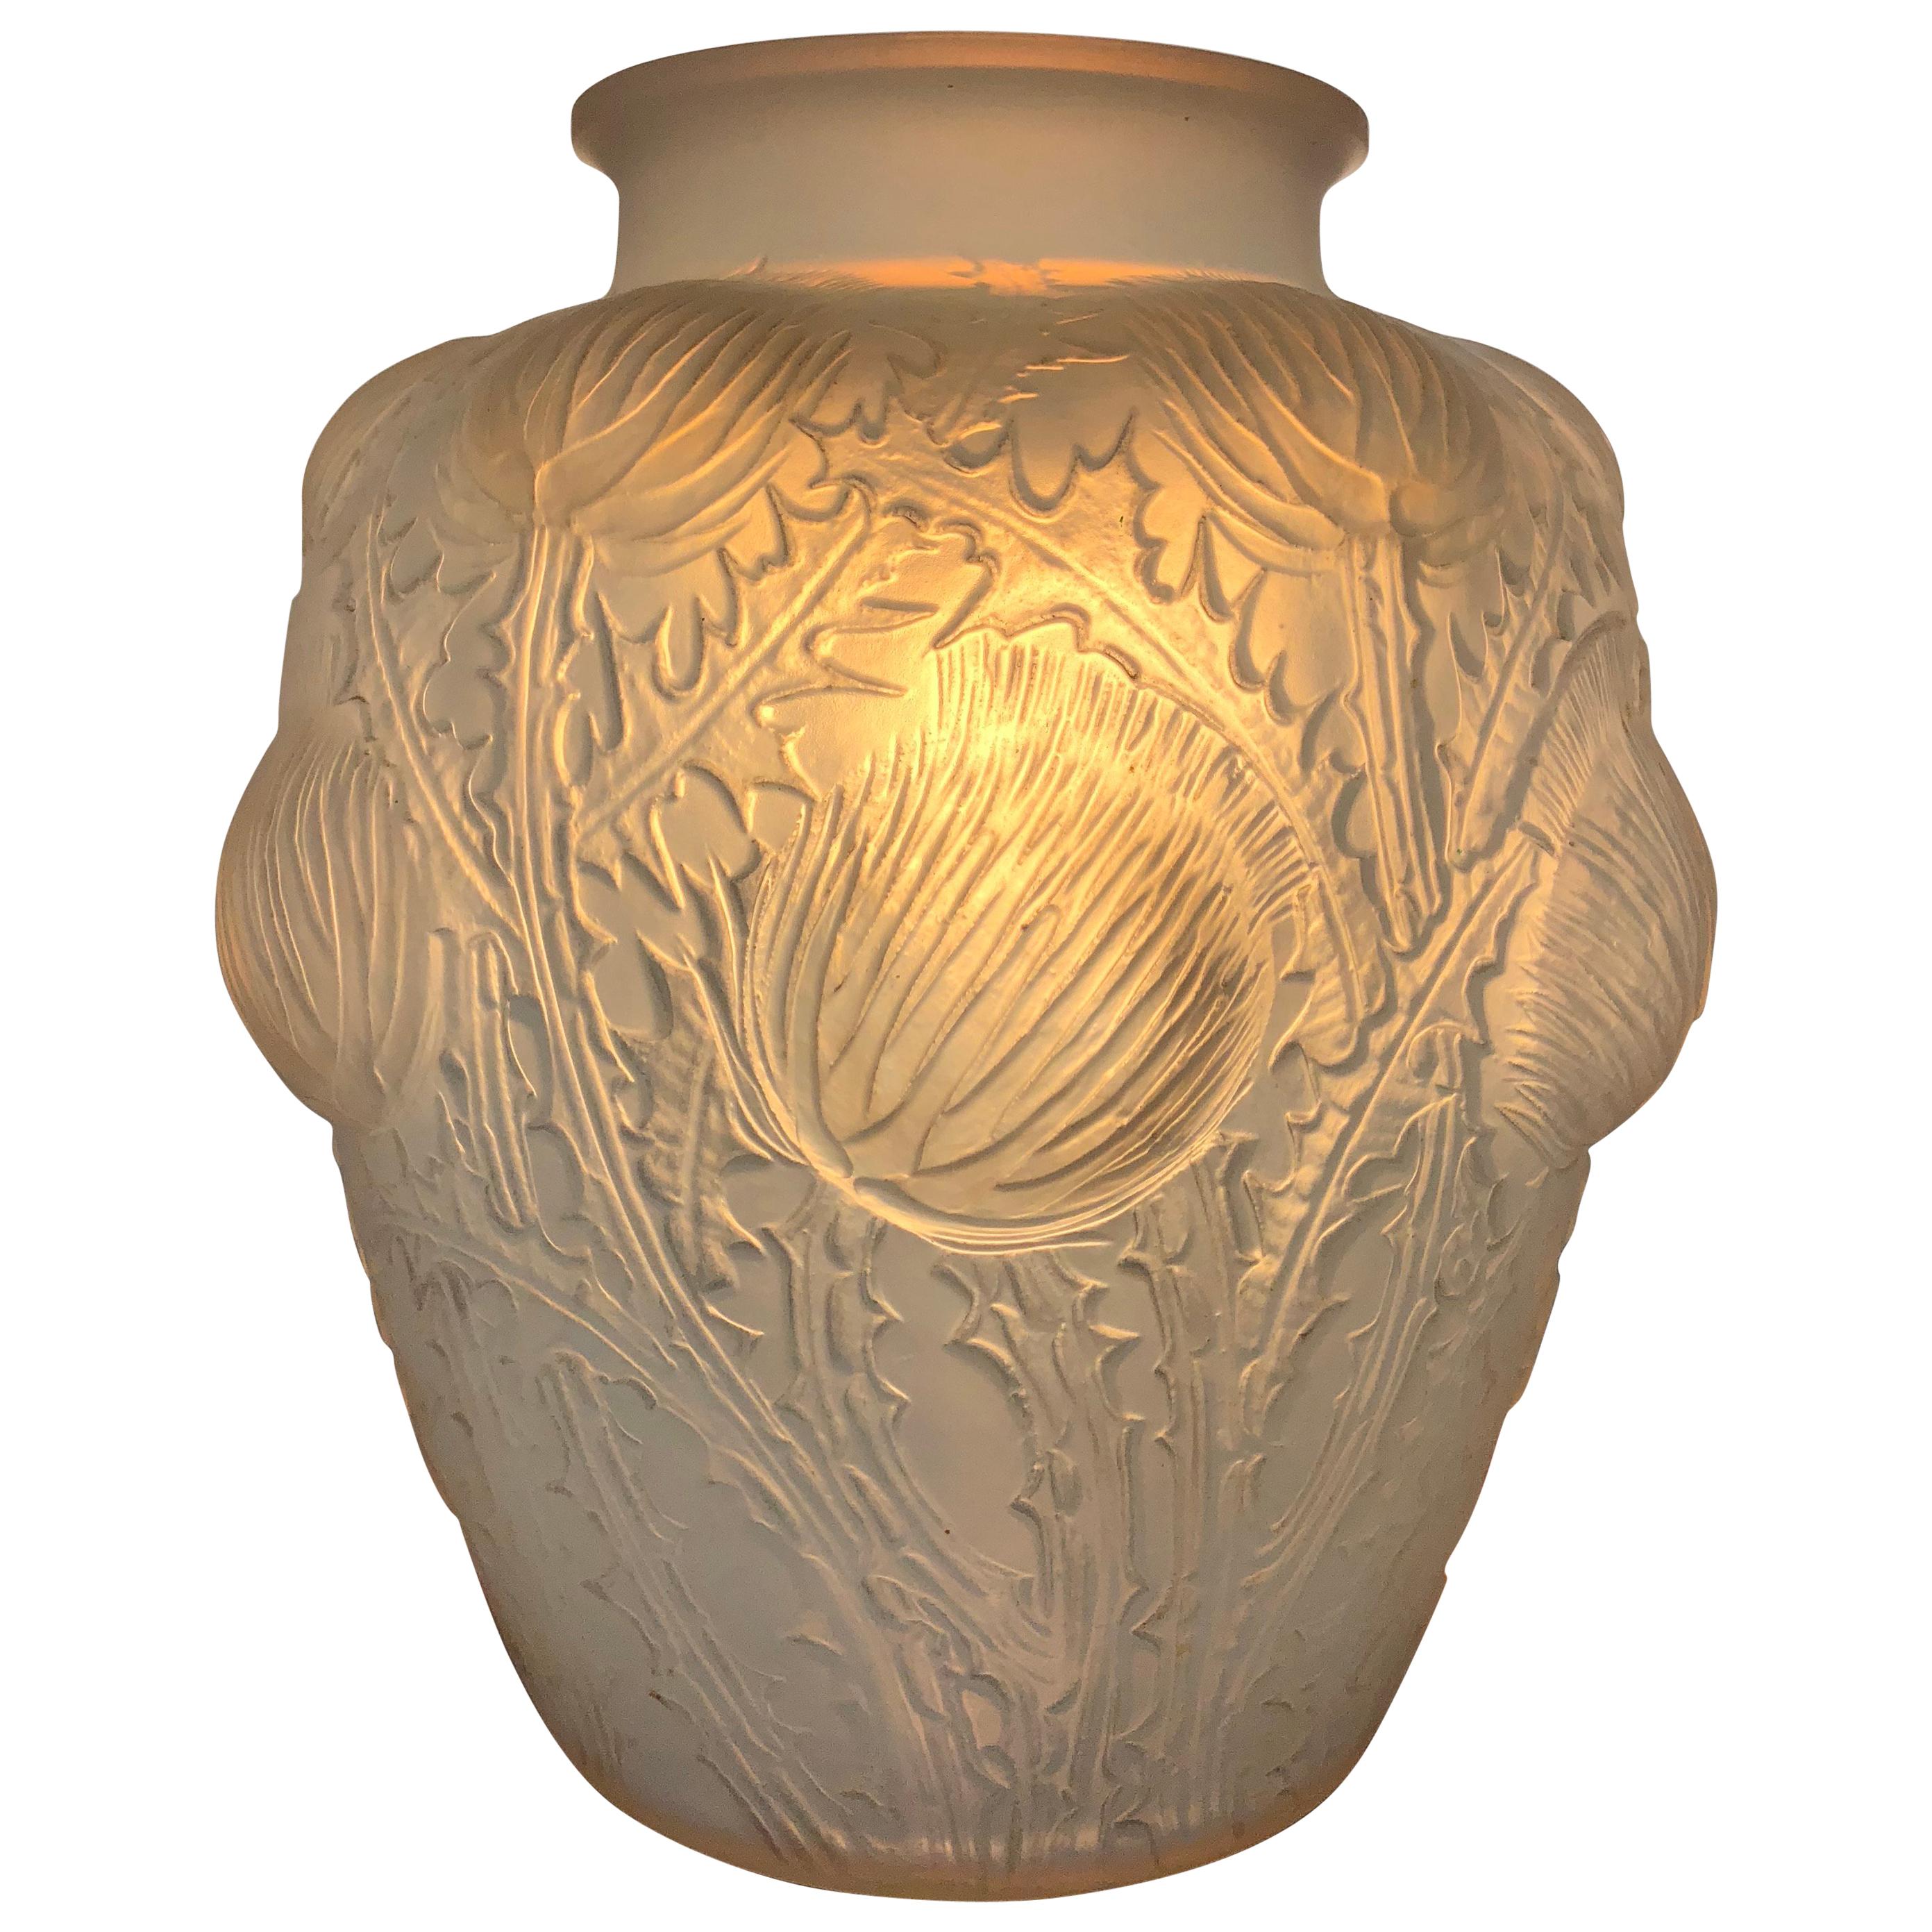 1926 Rene Lalique Domremy Vase in Double Cased Opalescent and Stained Glass